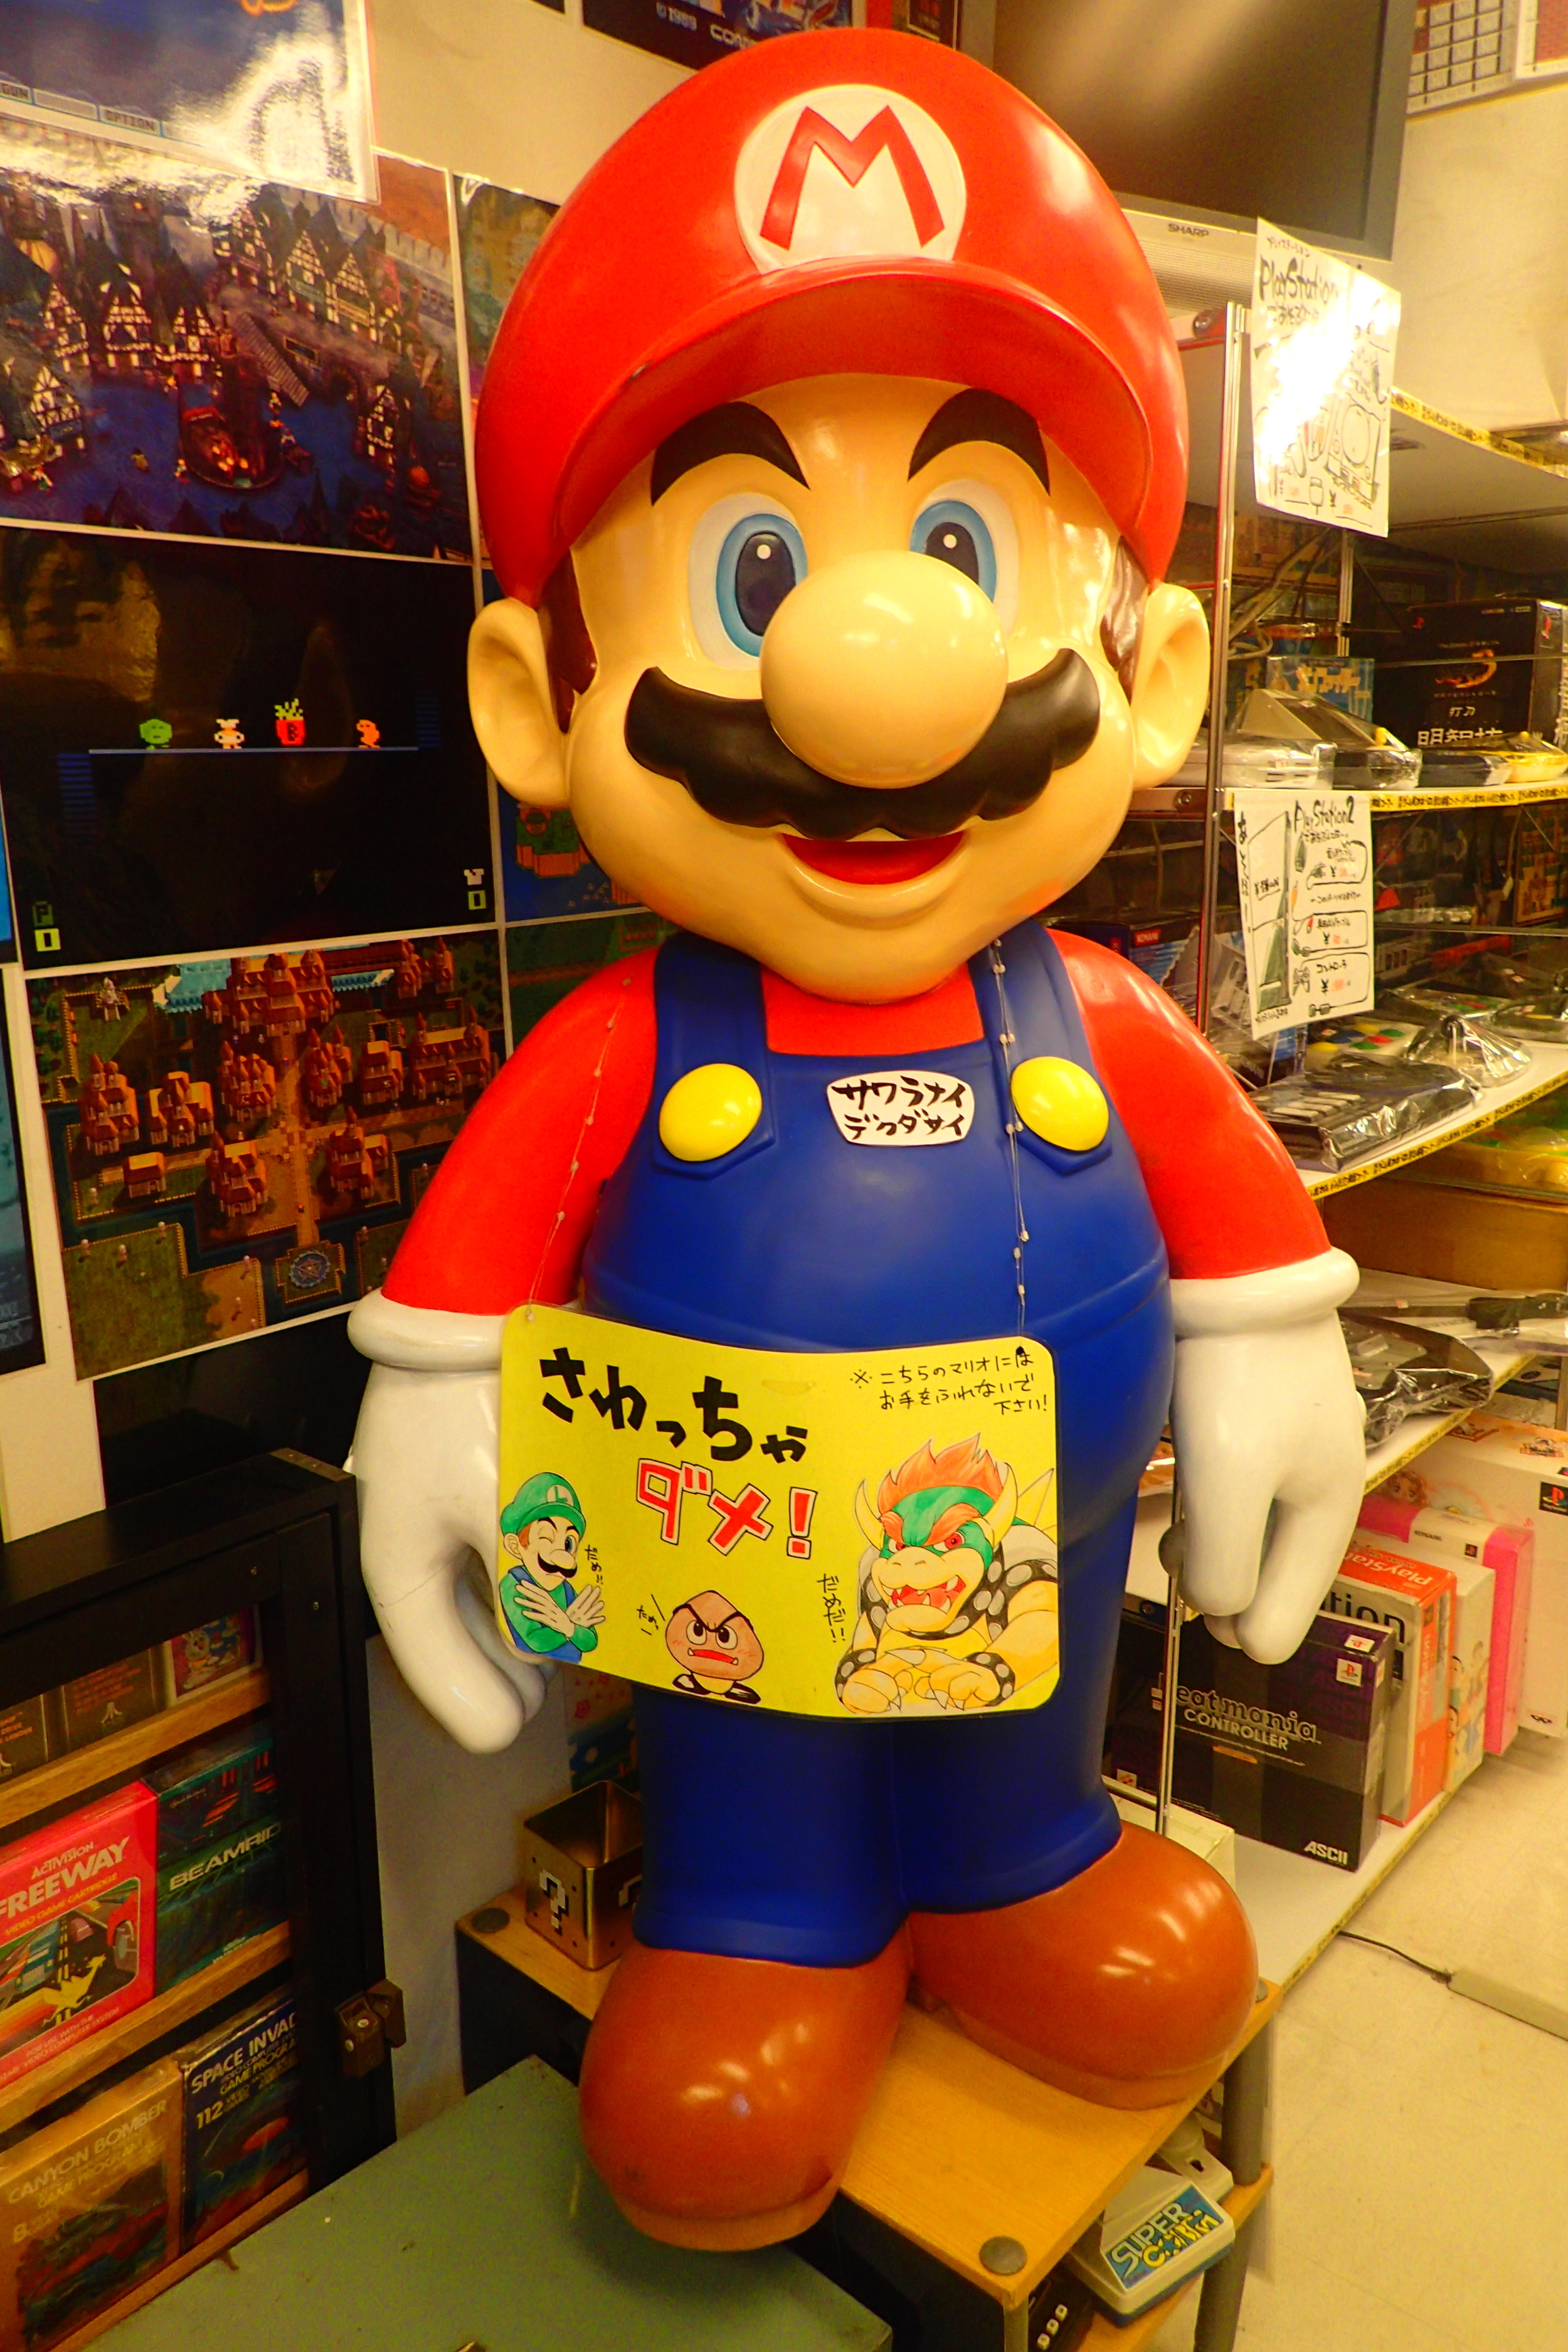 Shopping Spree in Tokyo on a Layover: Gamers and Anime-Lovers